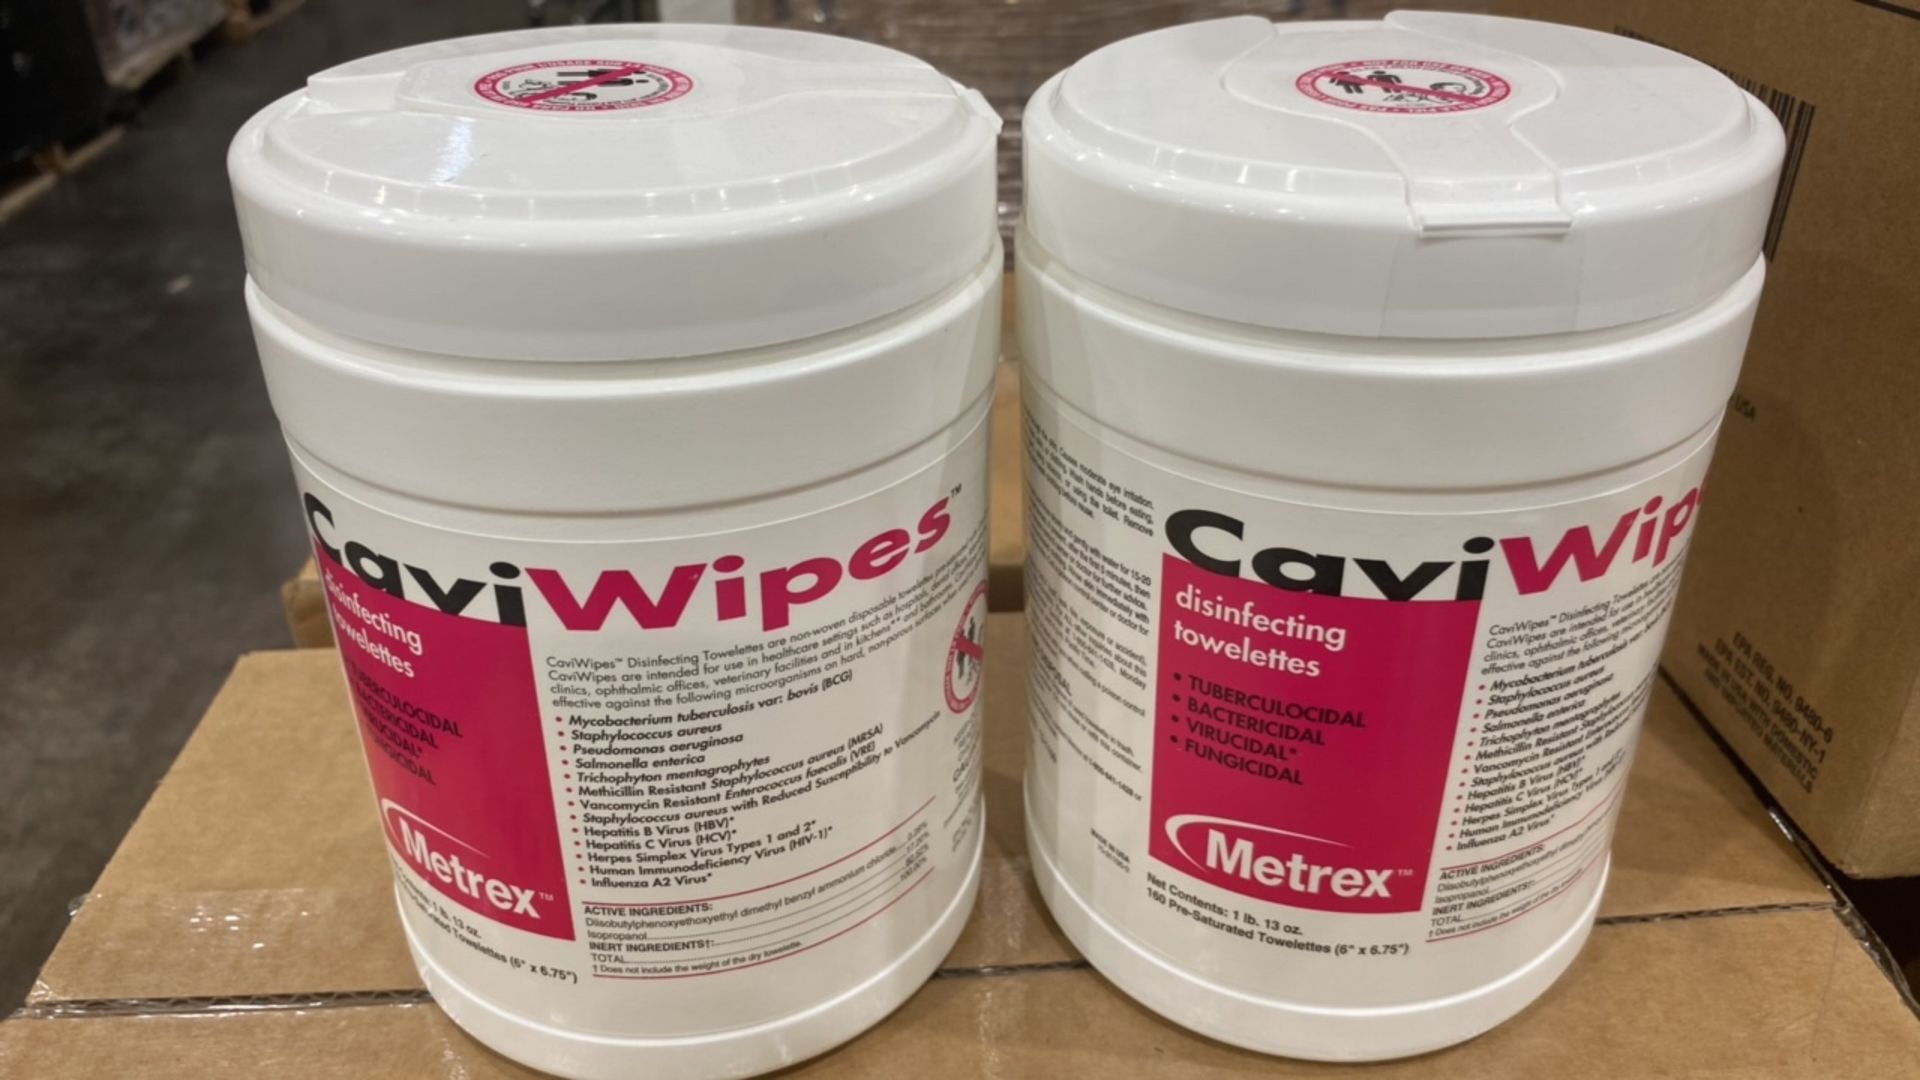 METREX CAVI WIPES 13-1100 DISINFECTING TOWELETTES (EXPIRED) QTY:40 CASES/ 12 PER CASE (160 - Image 3 of 3